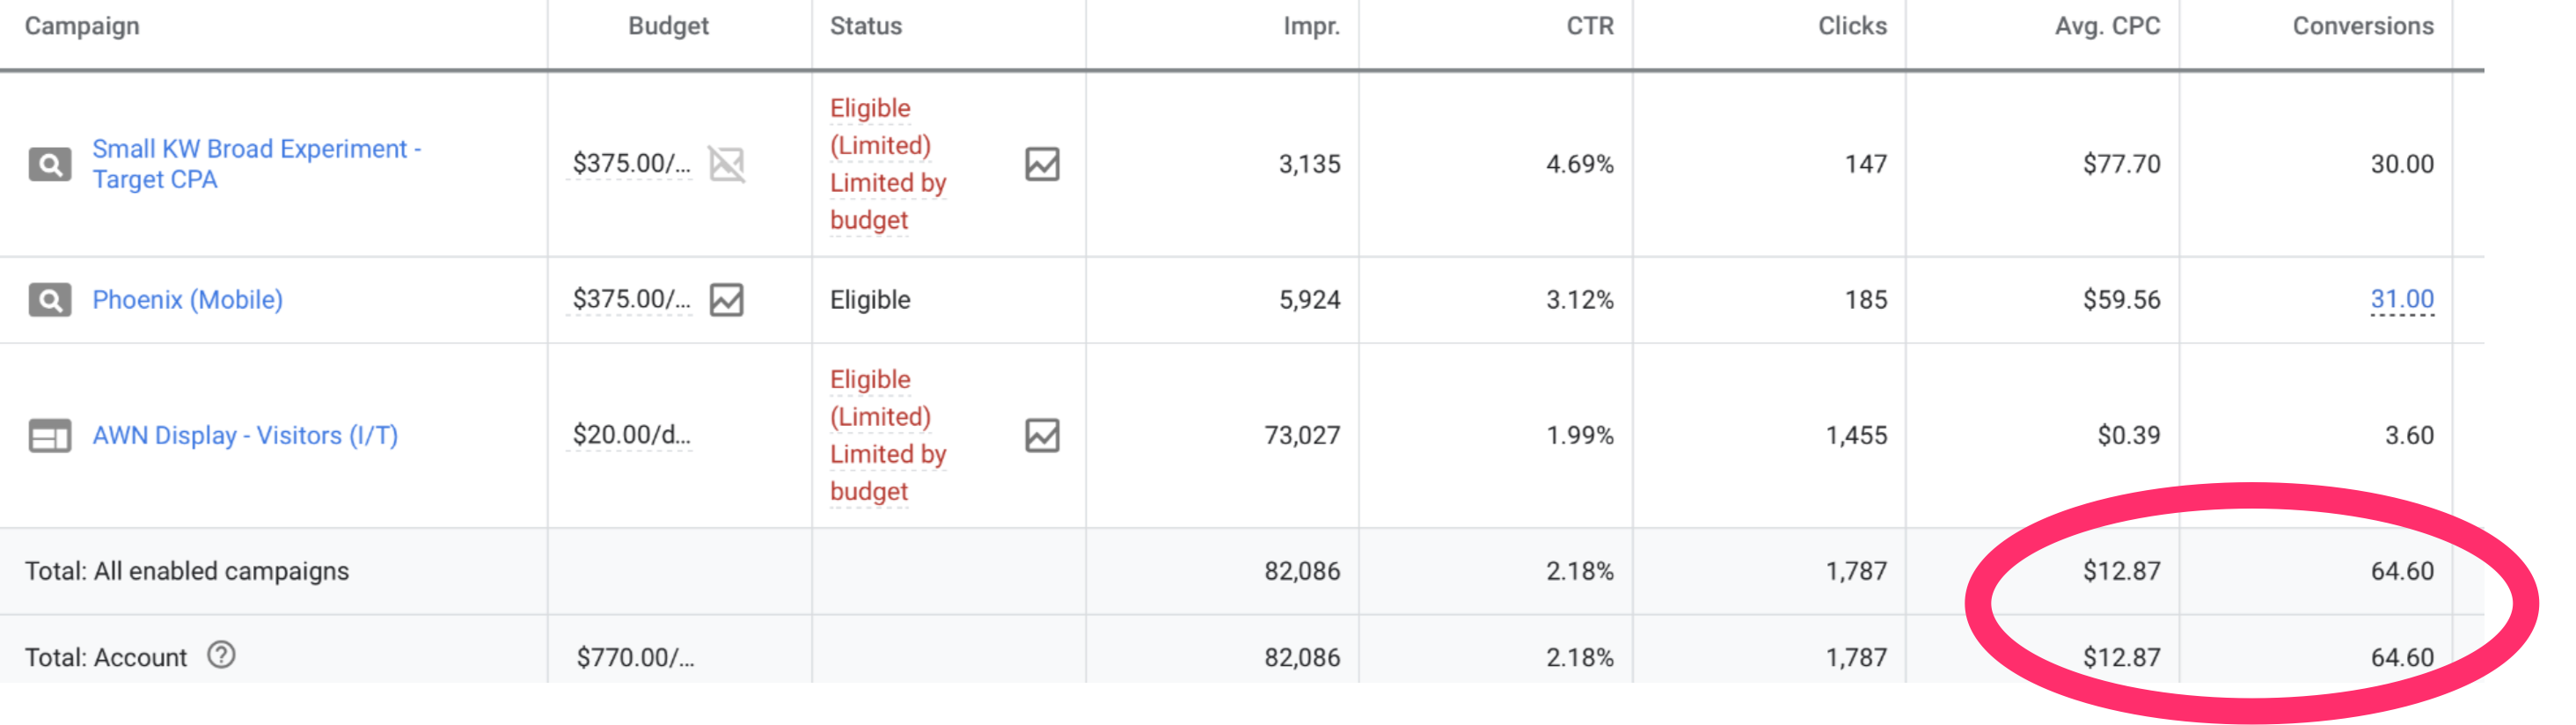 adwords nerds results 2